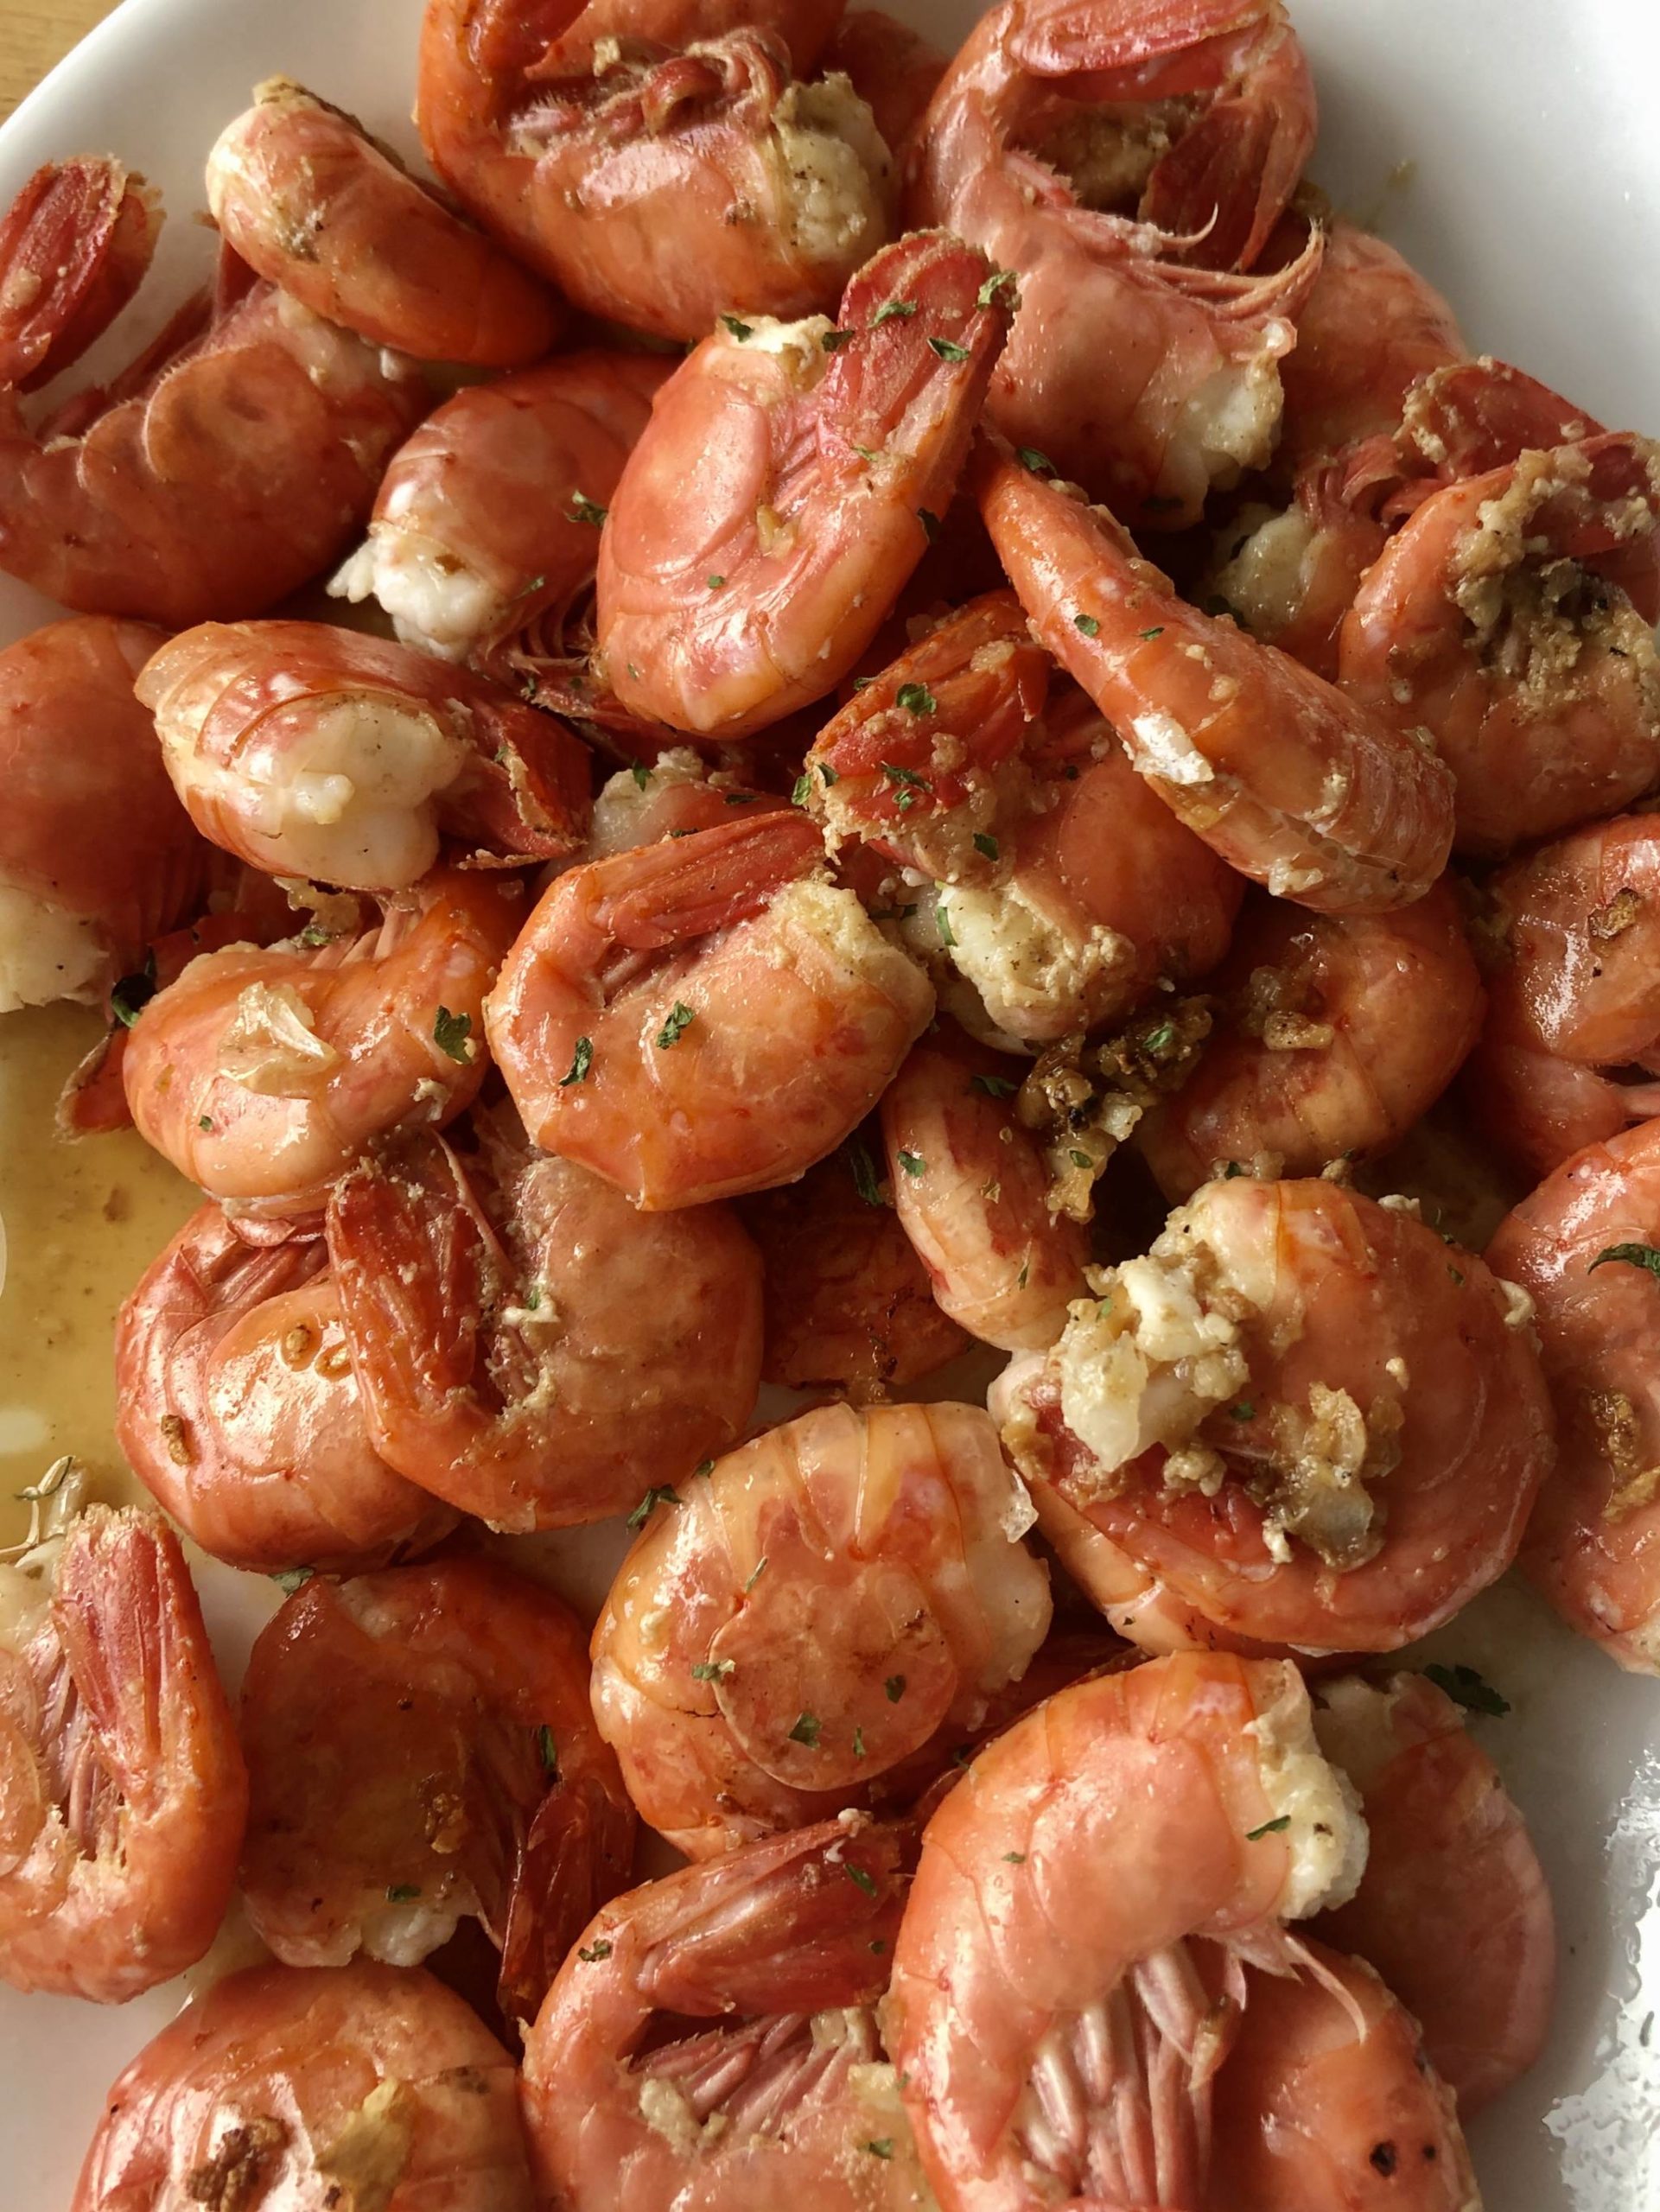 Photo by Emily Gilbert/Whidbey News-Times
Chopped garlic and parsley and salt and spot shrimp in 2020.